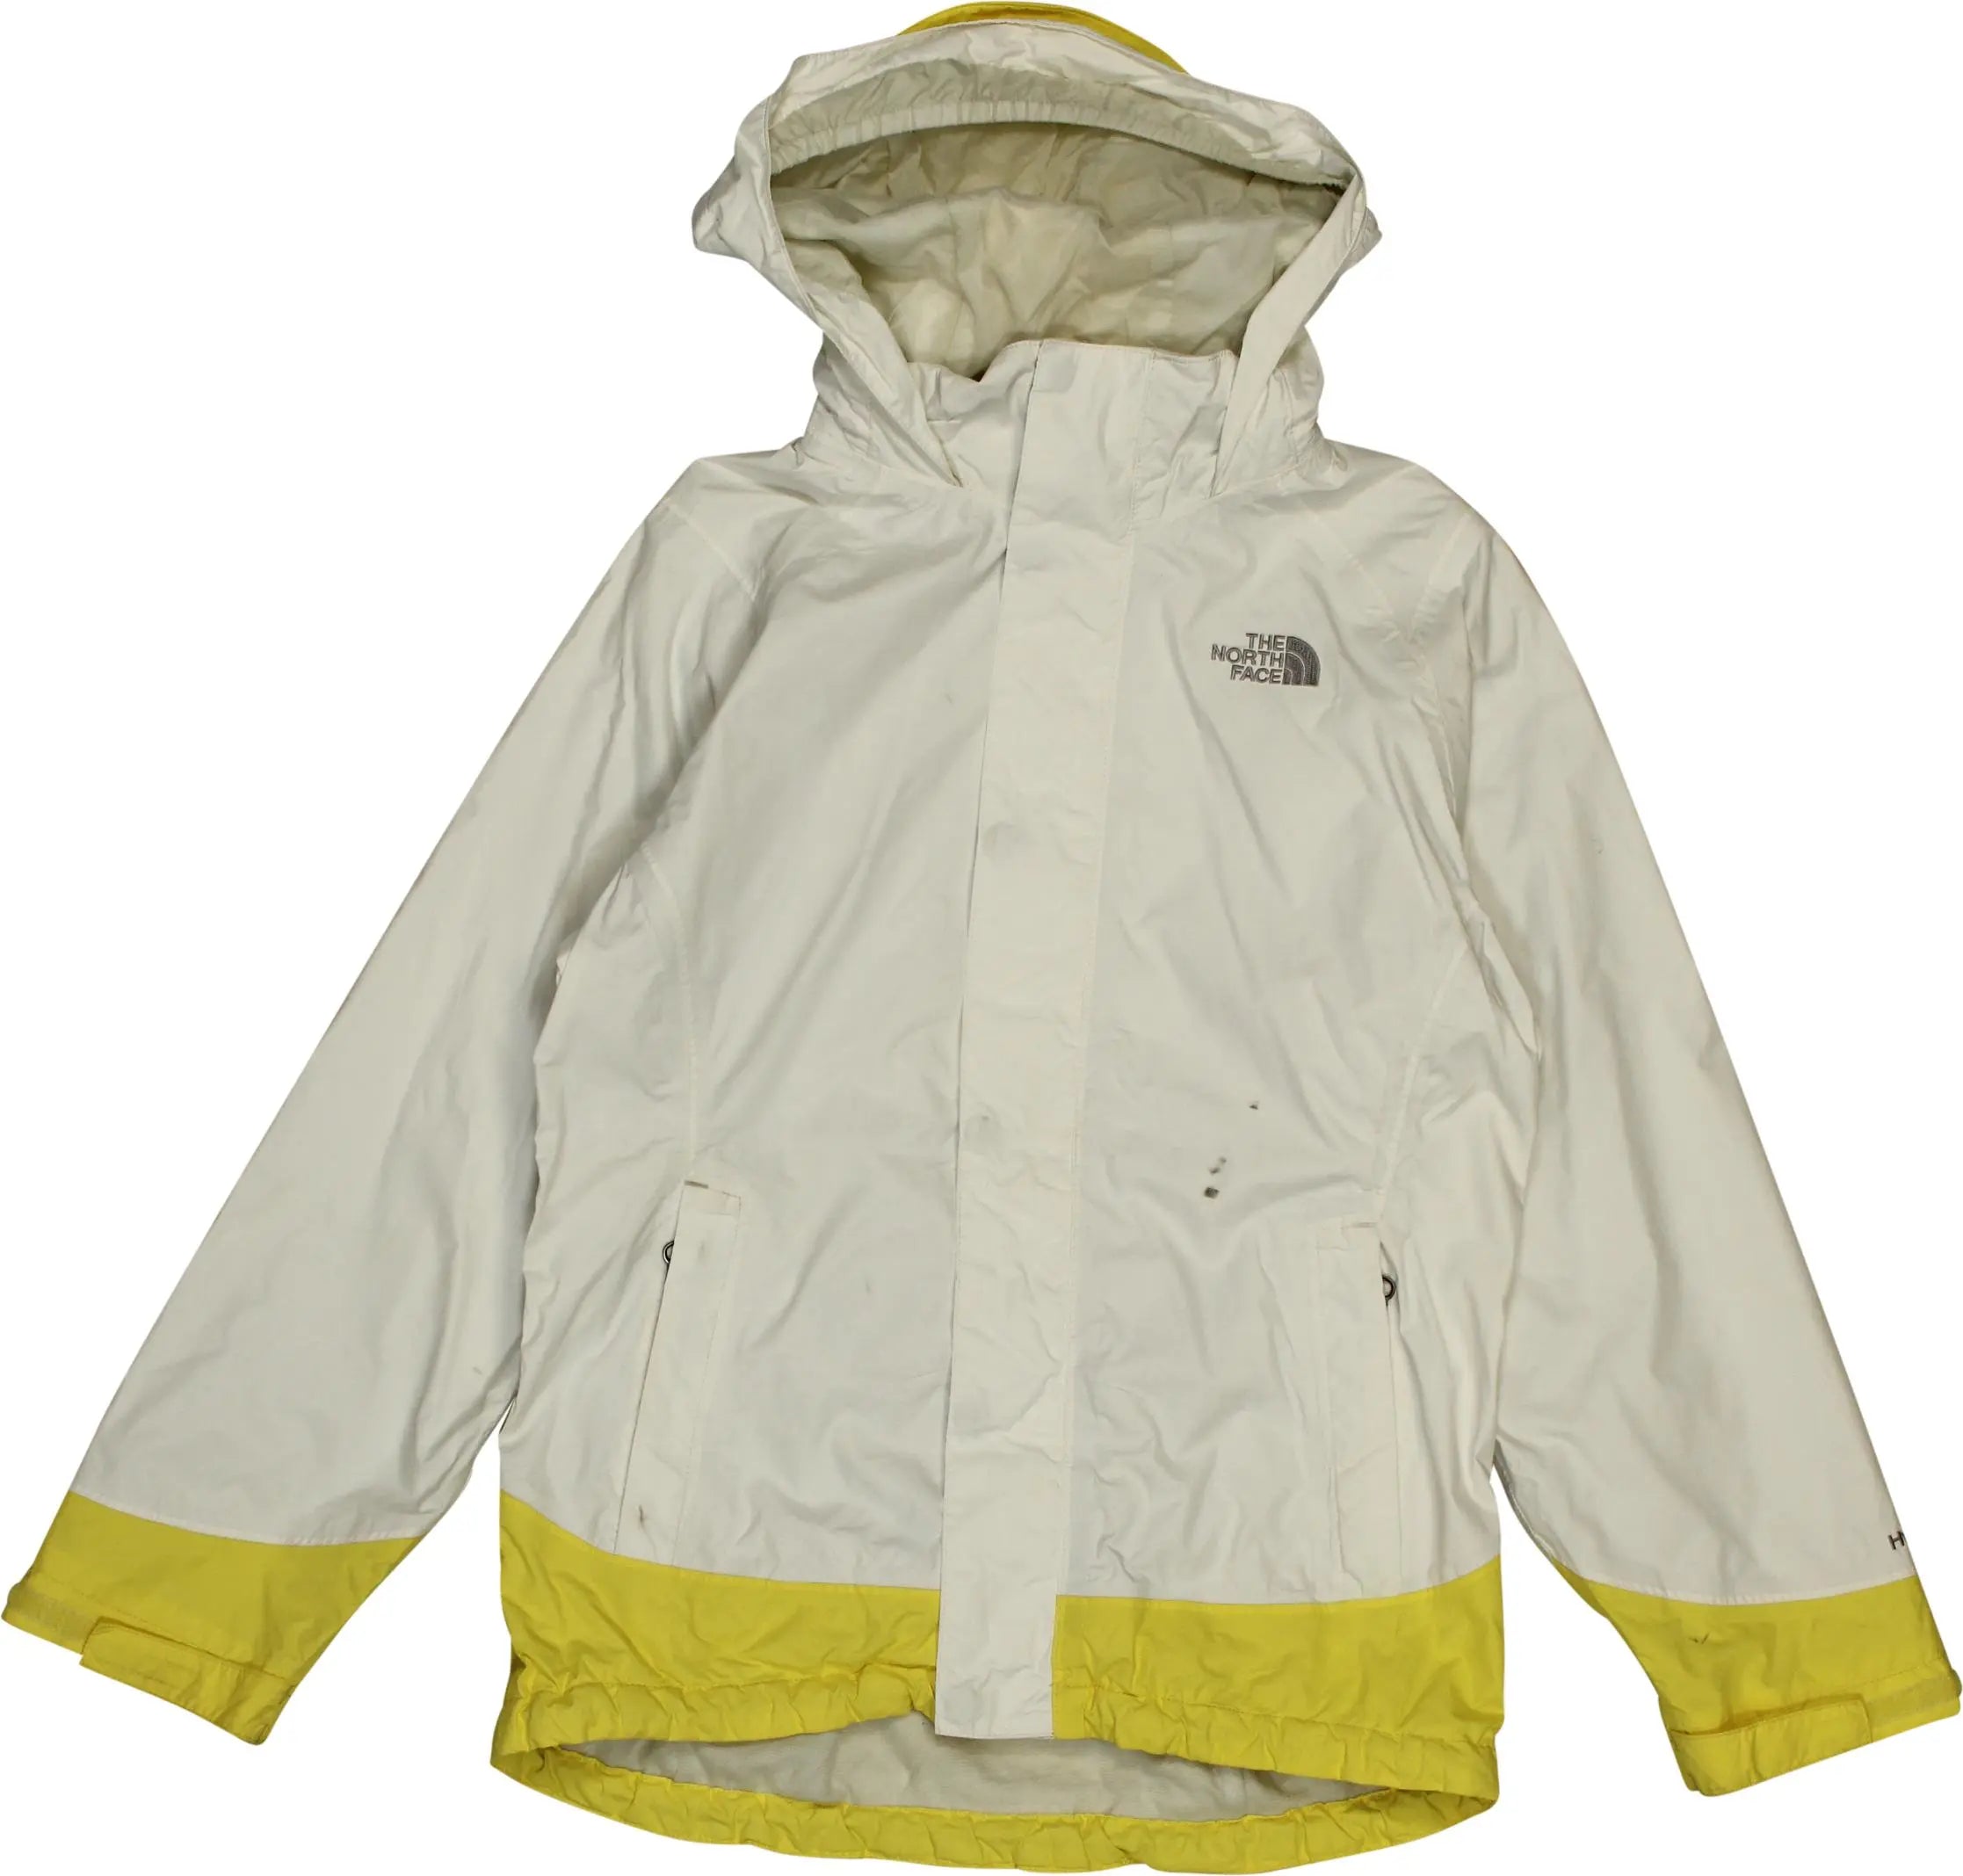 The North Face - Jacket- ThriftTale.com - Vintage and second handclothing